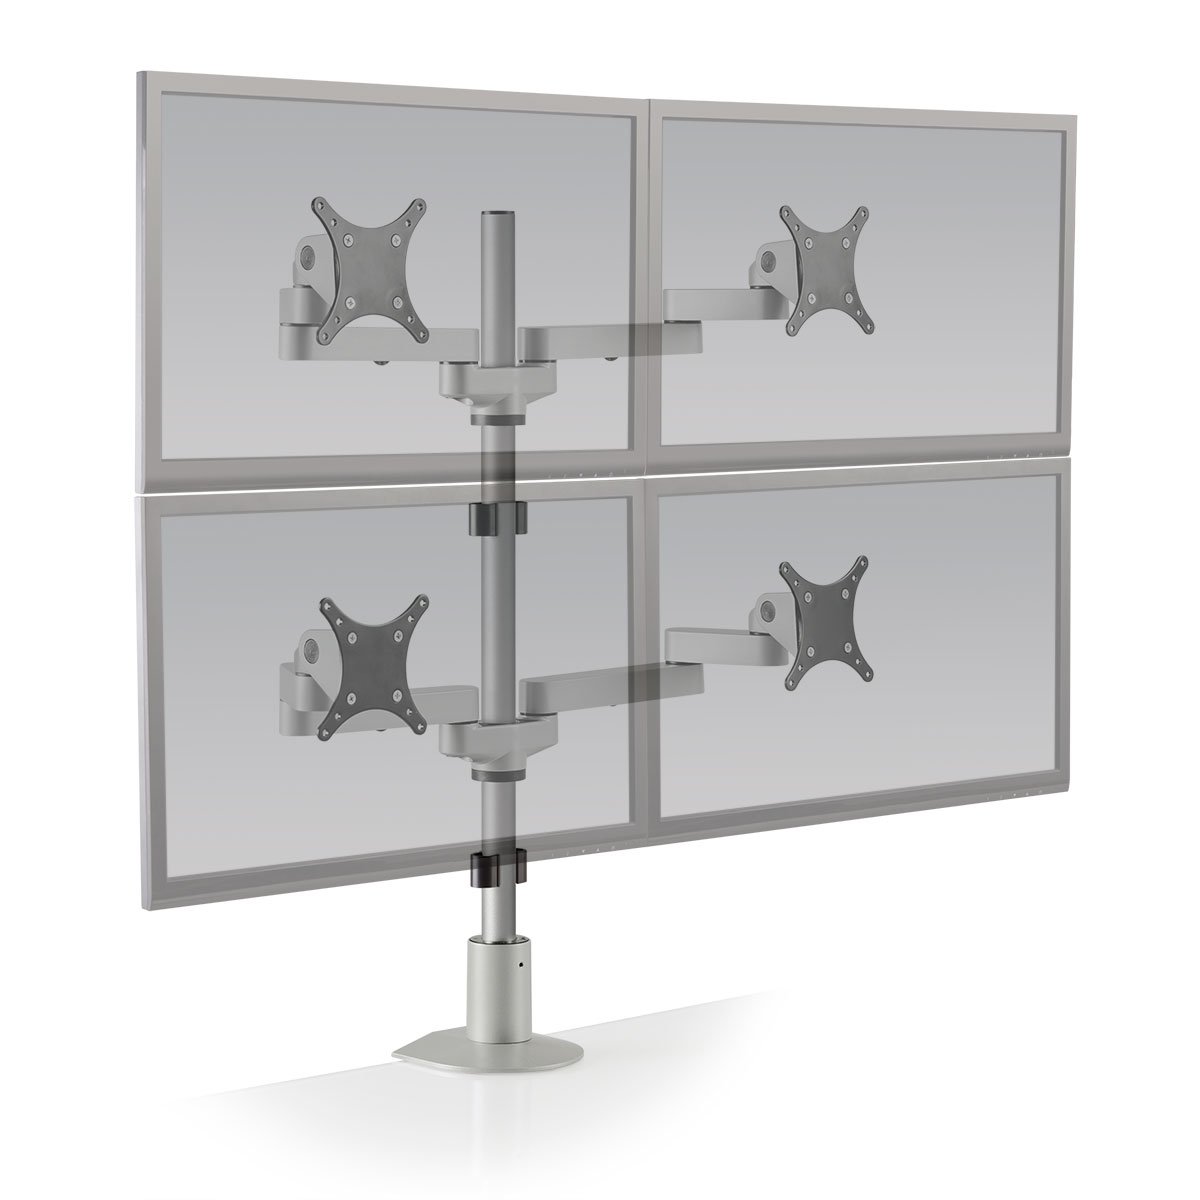 Innovative 9120-D-28 Two-Tier Quad Monitor Arm with 28" Pole